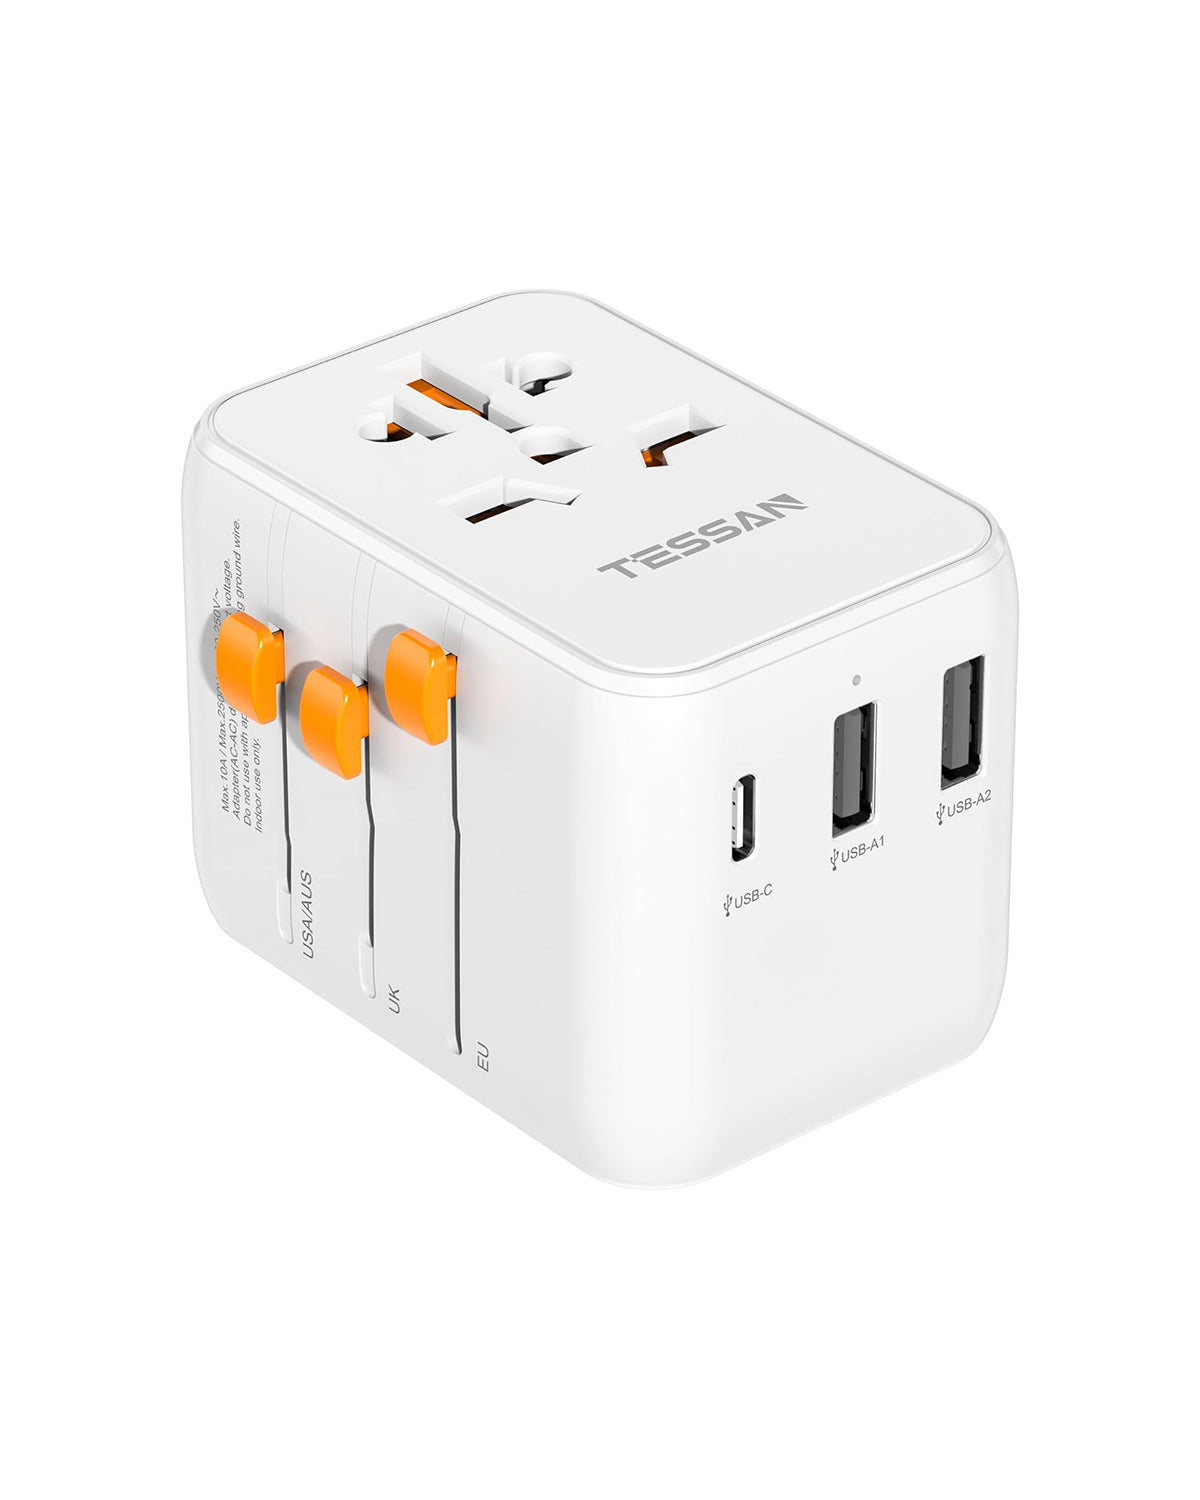 TESSAN International Plug Adaptor with 1 USB C Wall Charger 2 USB A Ports, All-in-one Worldwide Power Outlet for US to European EU UK AUS (Type C/G/A/I)